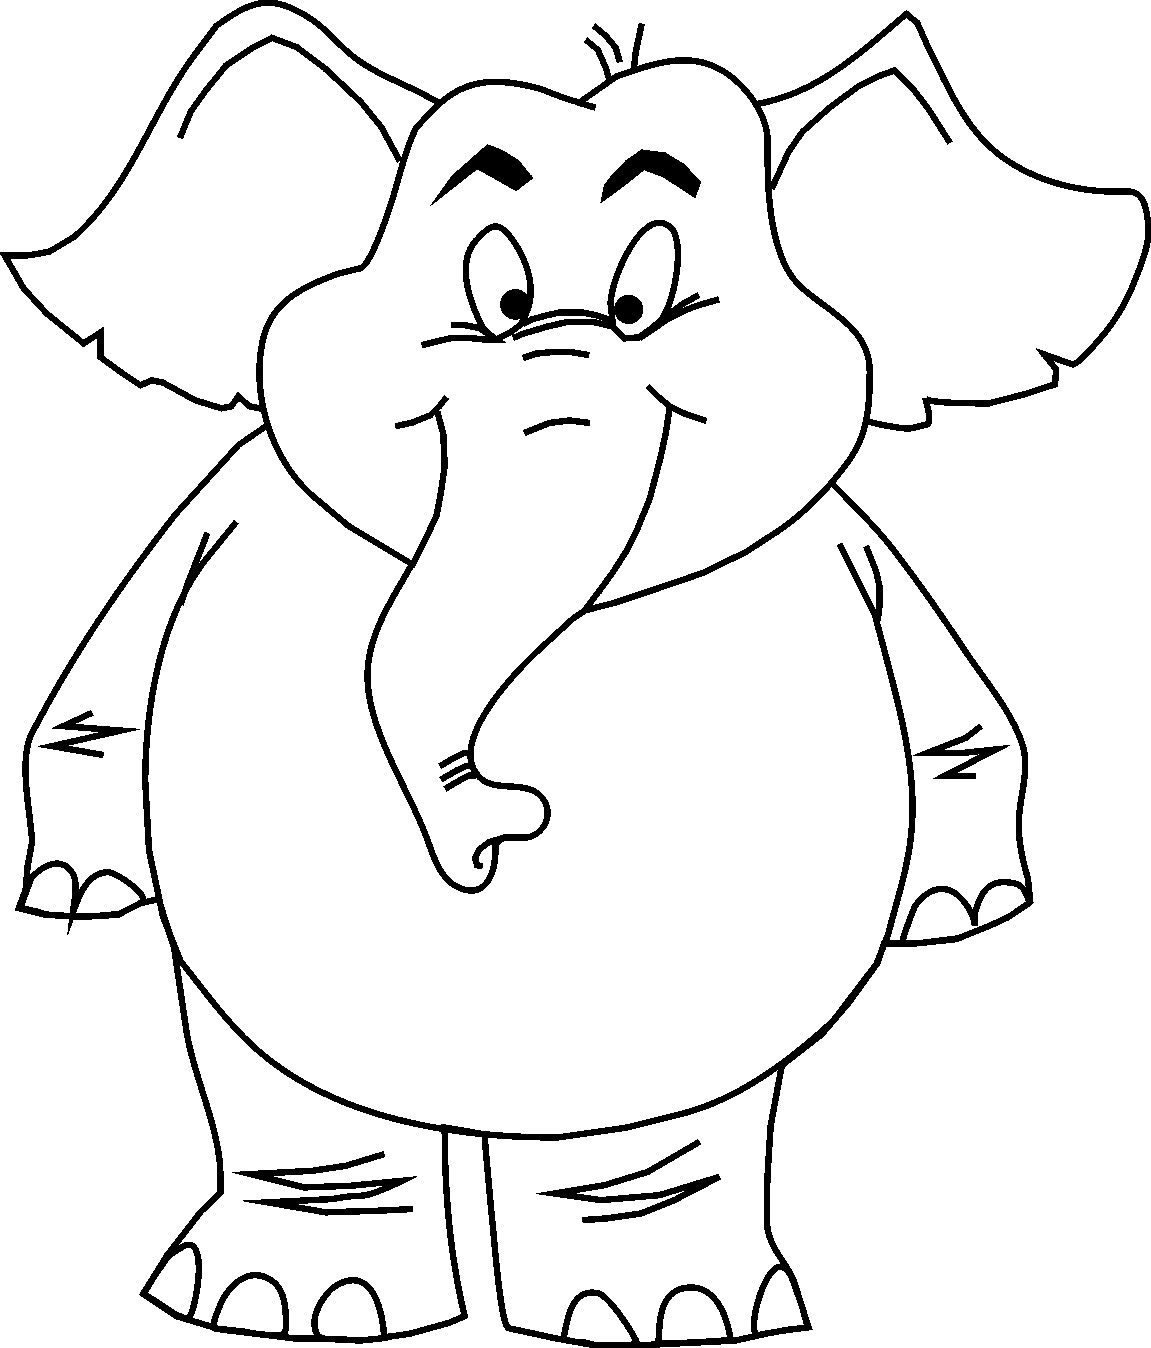 Free Animal Coloring Pages For Kids
 Kids Coloring Pages May 2013